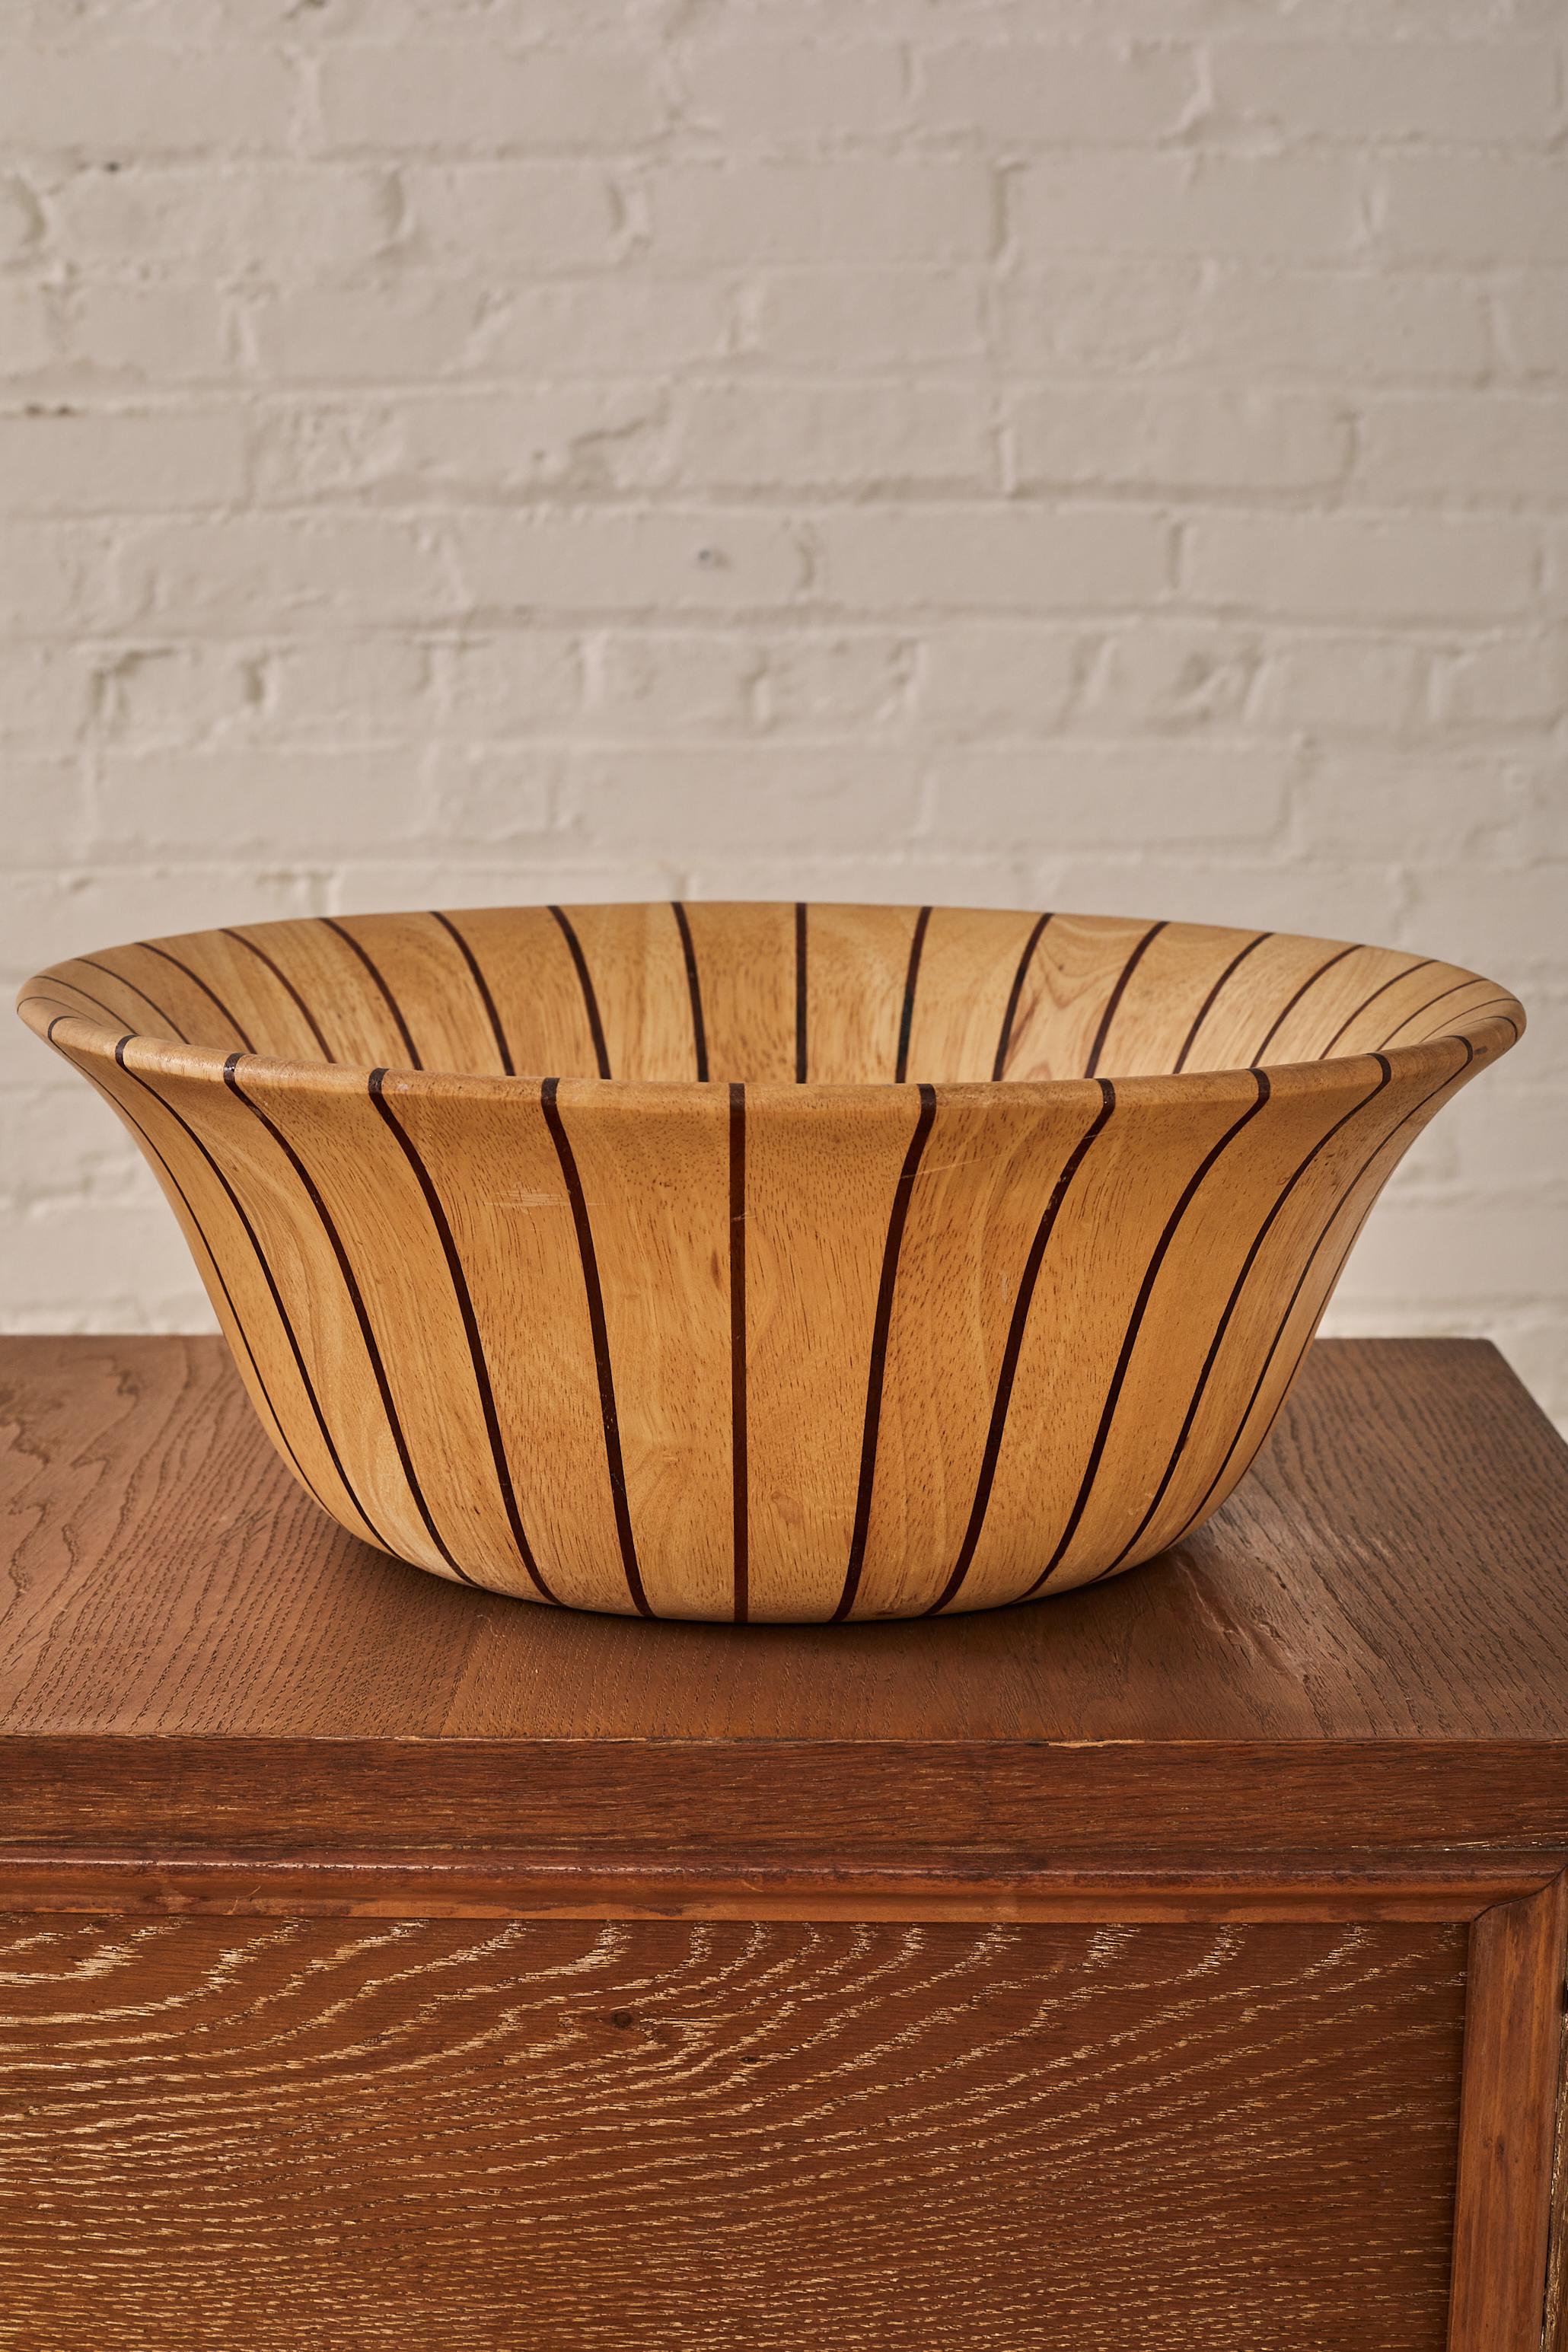 Serving Bowl by Jens QuistGaard for Dansk in pine wood with brown stripe detailing. 

